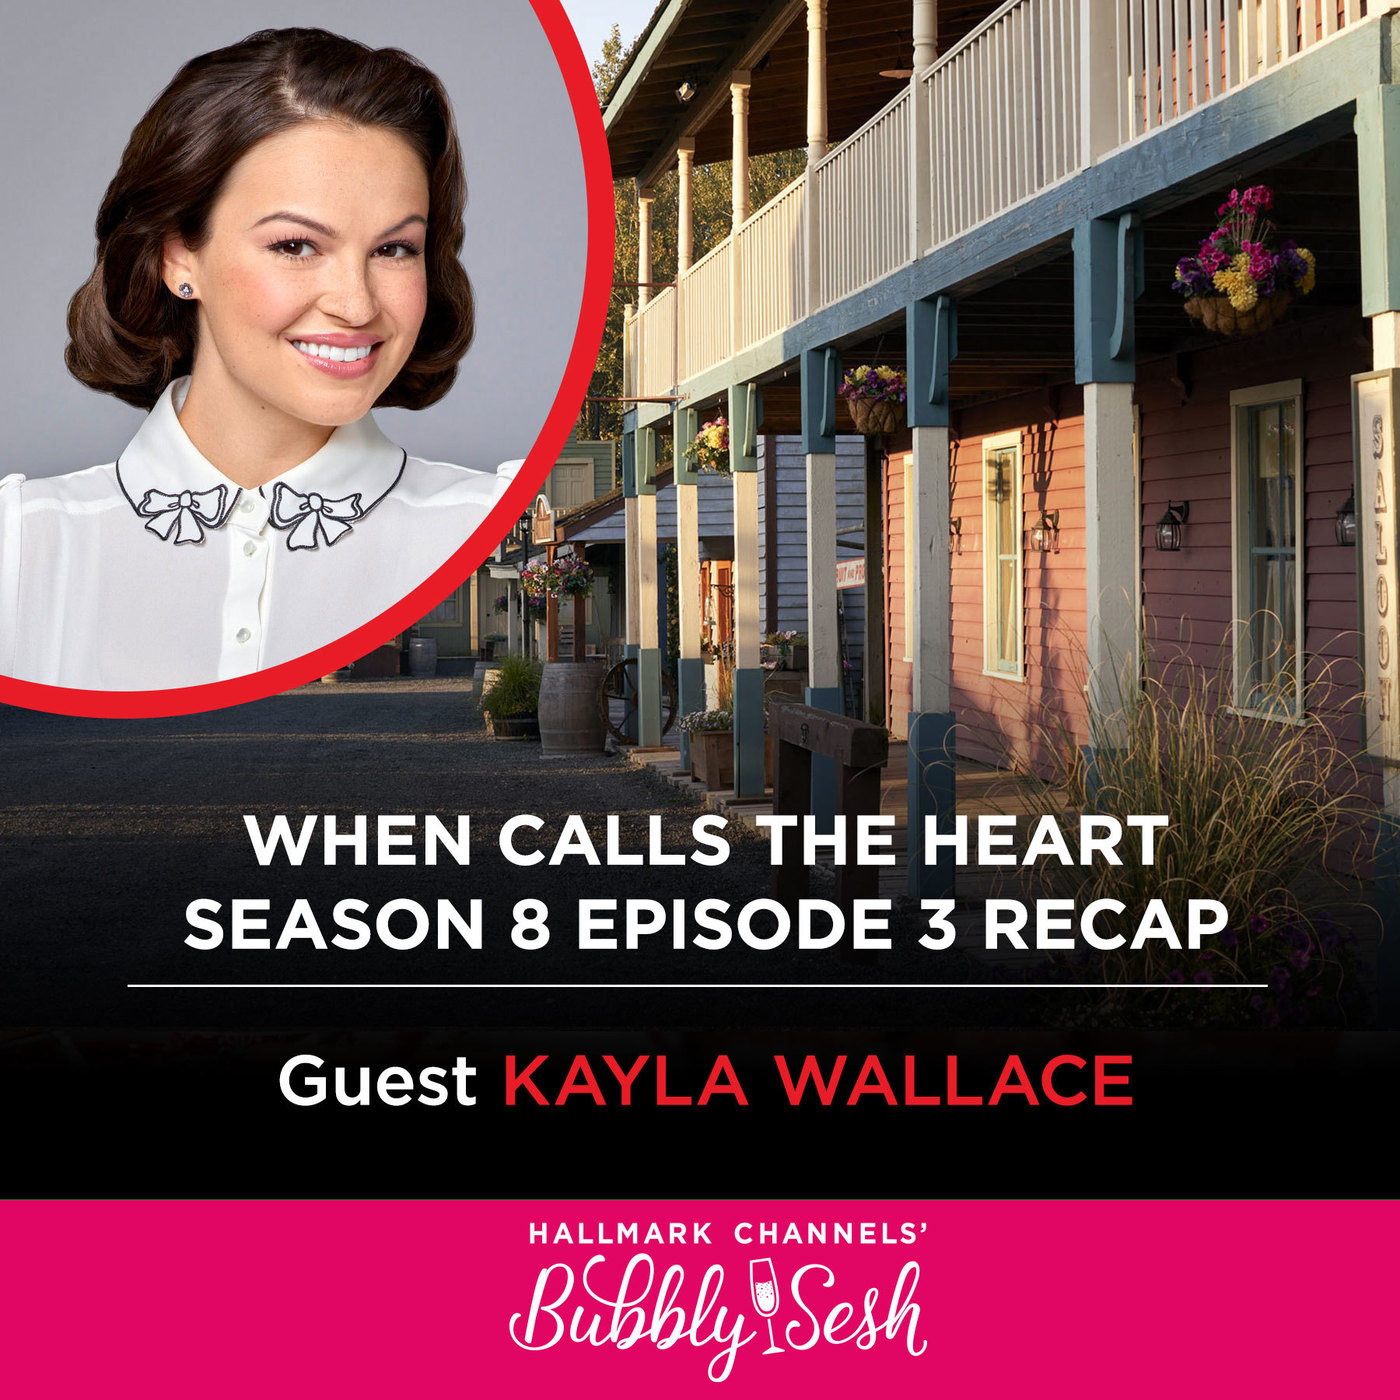 When Calls the Heart S8 Ep 3 Recap with Guest Kayla Wallace 